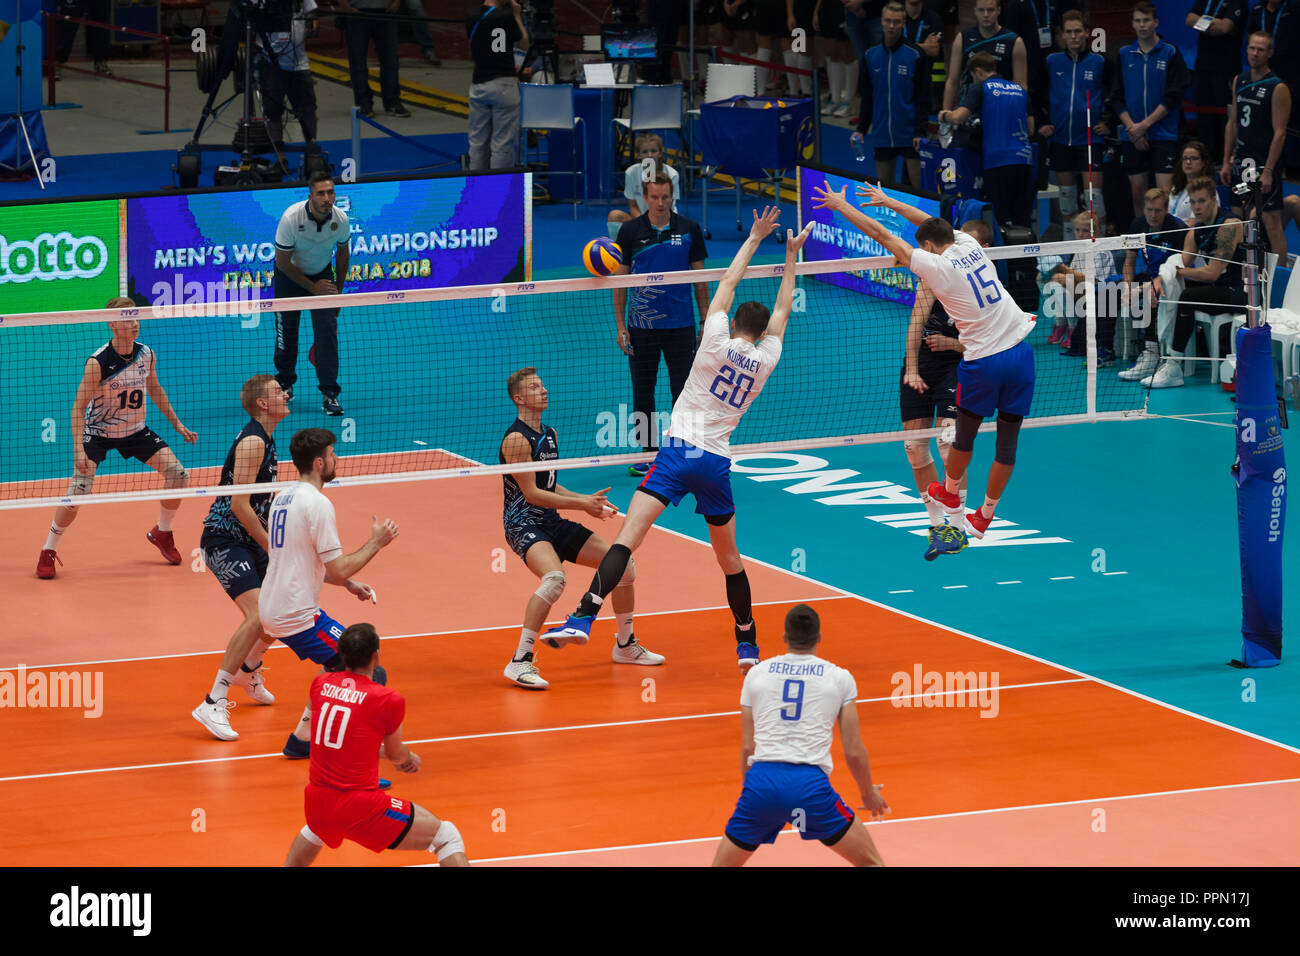 Milan (Italy), 23th September 2018: Match Russia vs Finland at FIVB Volleyball Men's World Championship 2018. Stock Photo